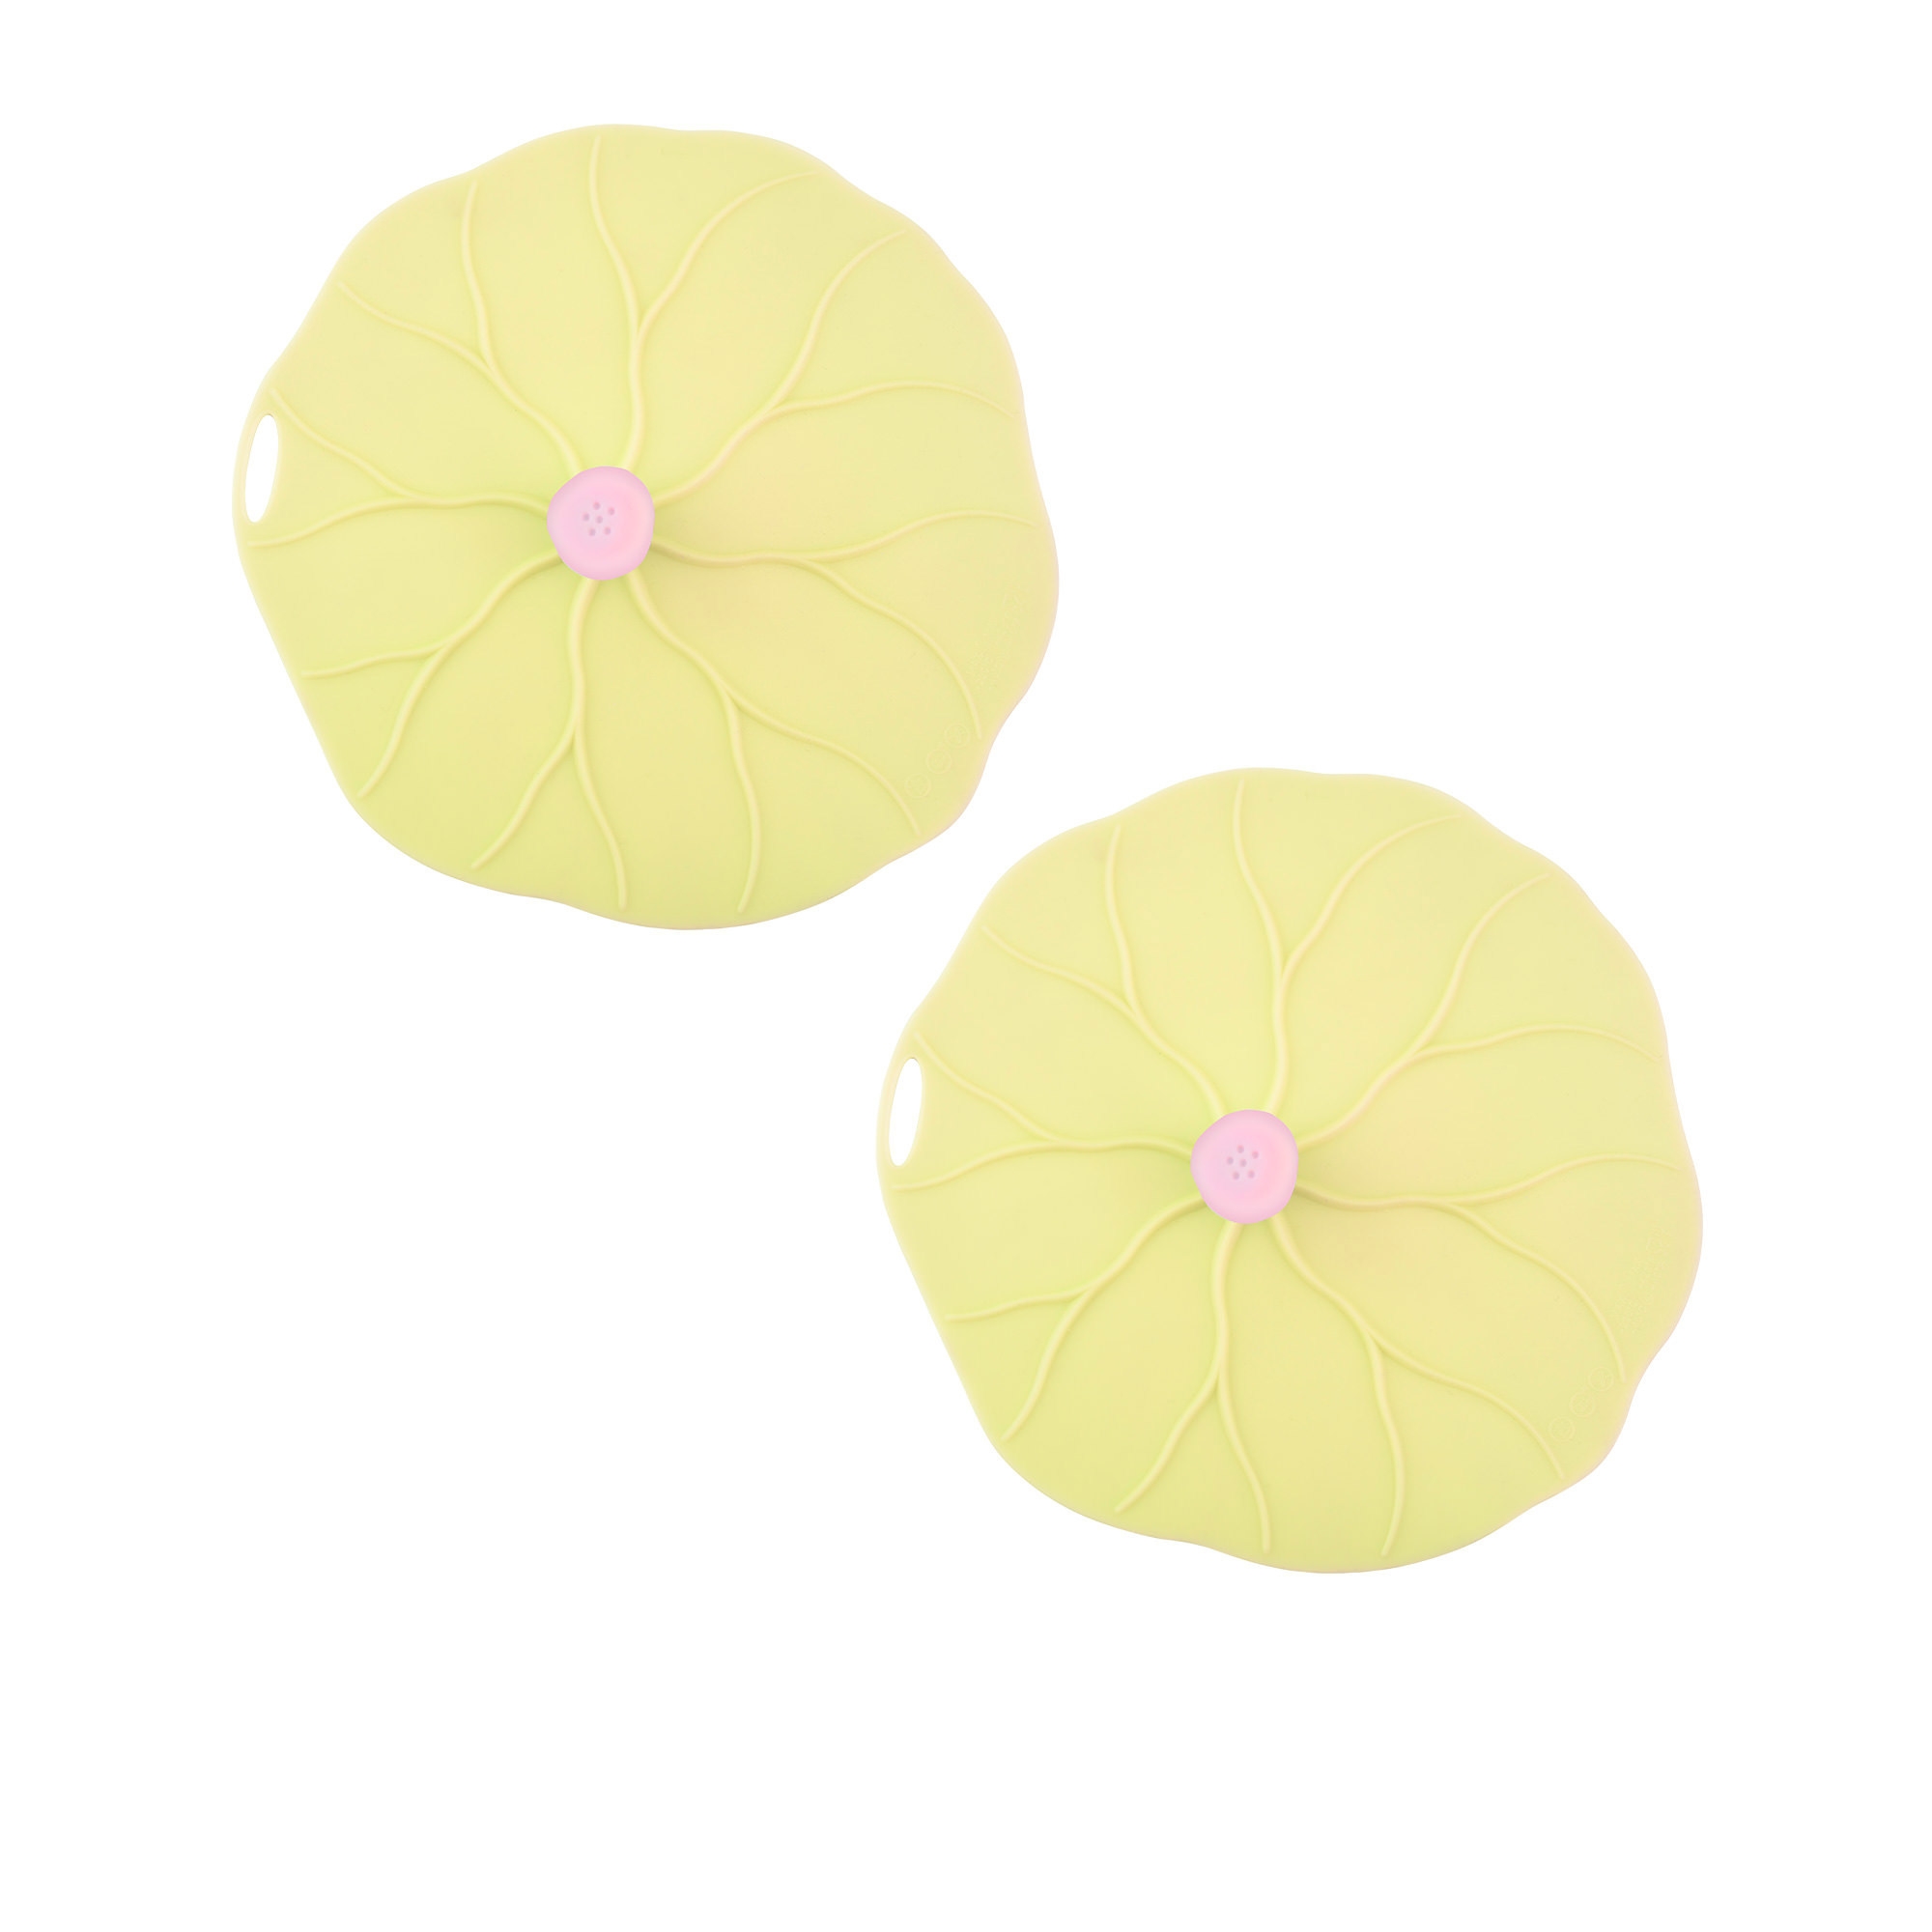 Avanti Silicone Lid Cover Small Set of 2 Image 1